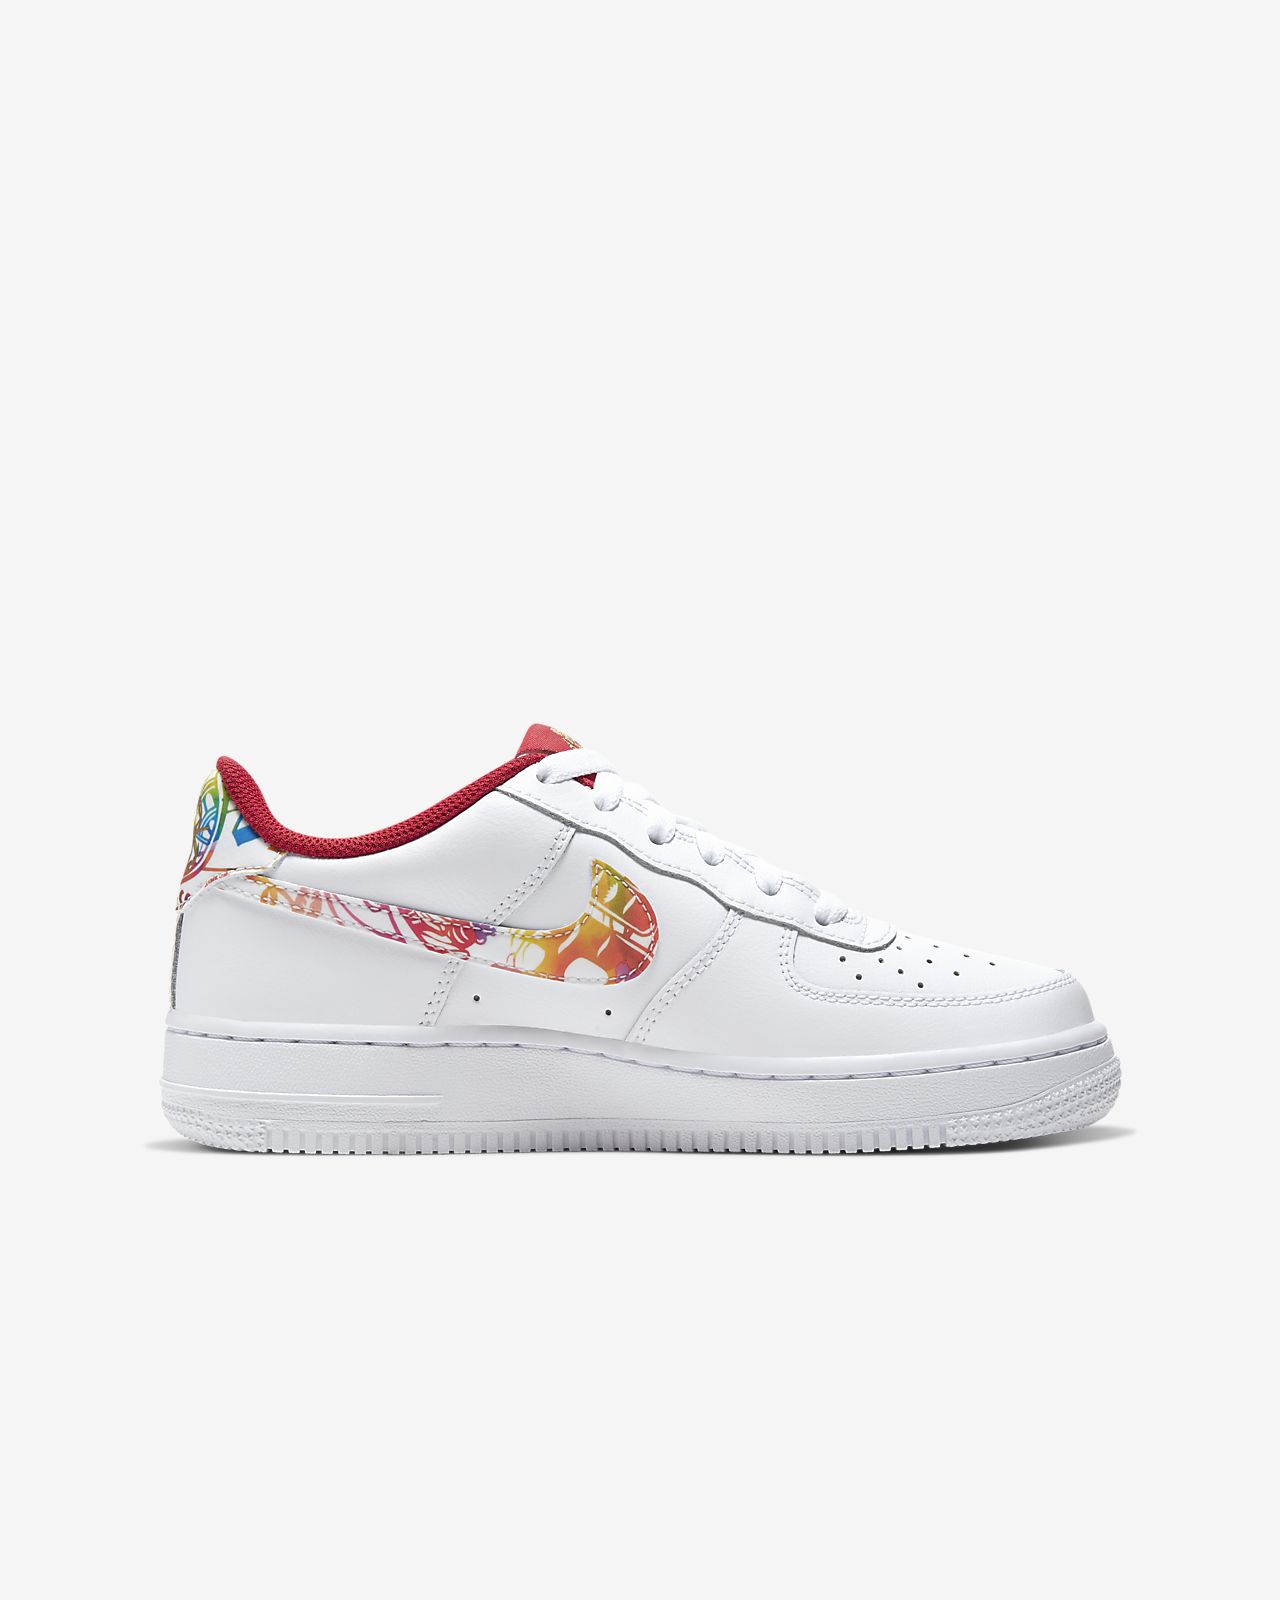 nike air force year of the rat